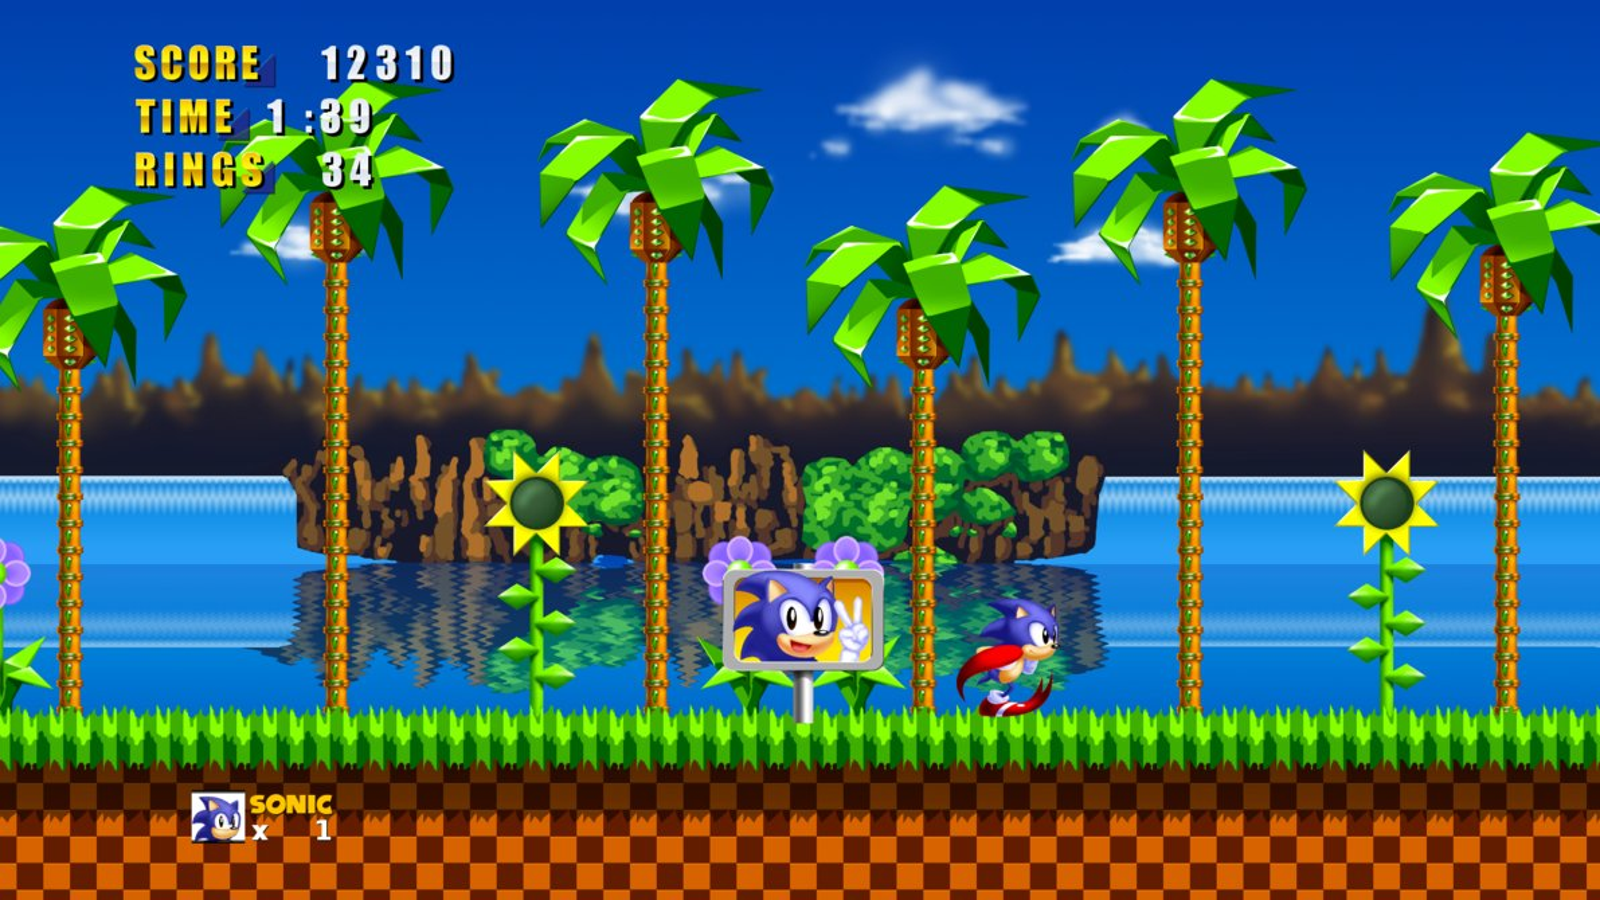 100+] Green Hill Zone Backgrounds